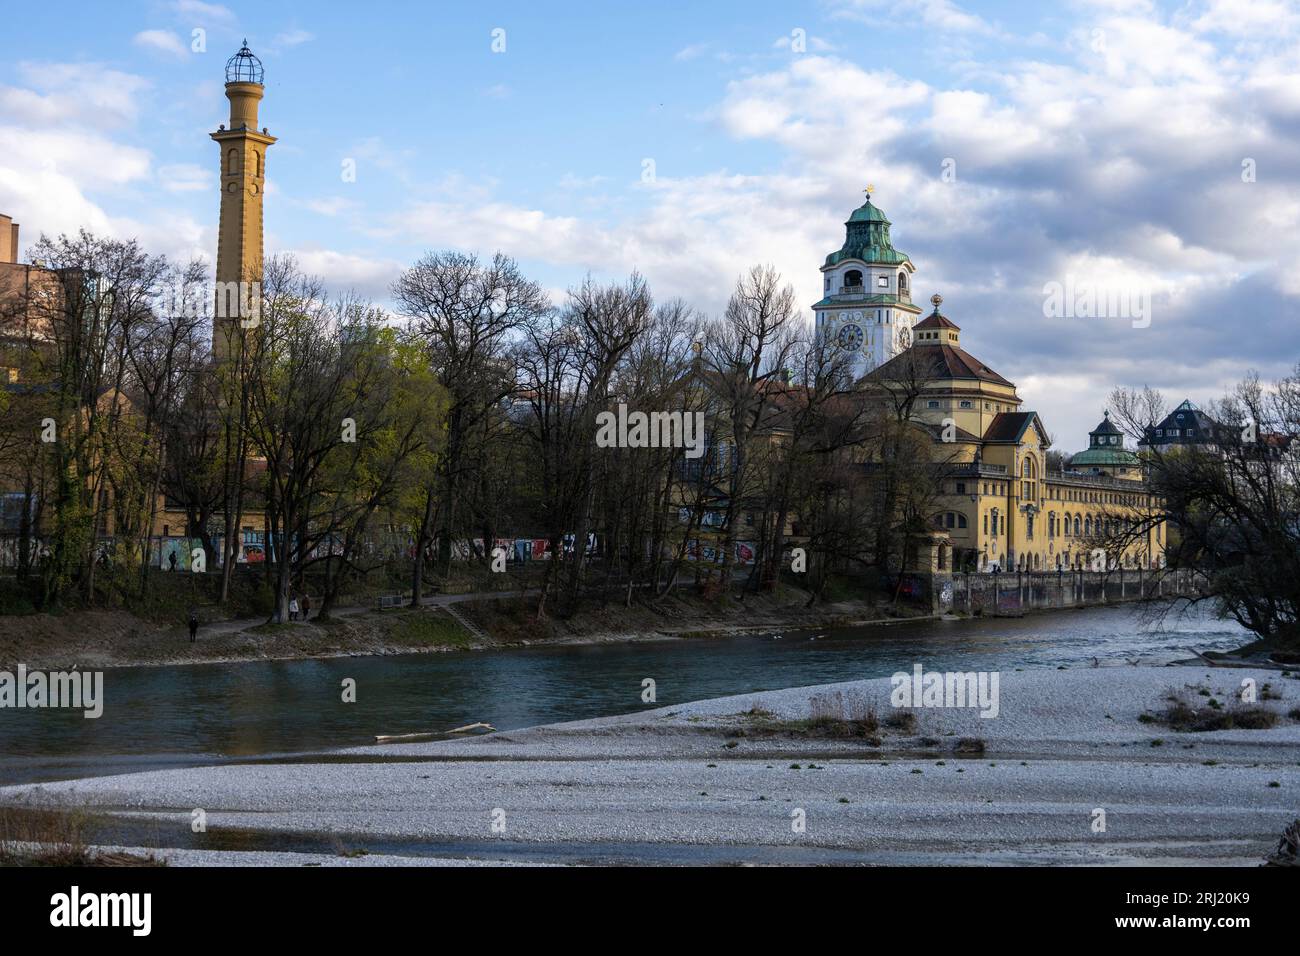 Indoor Public Swimming Pool on the Isar River Stock Photo